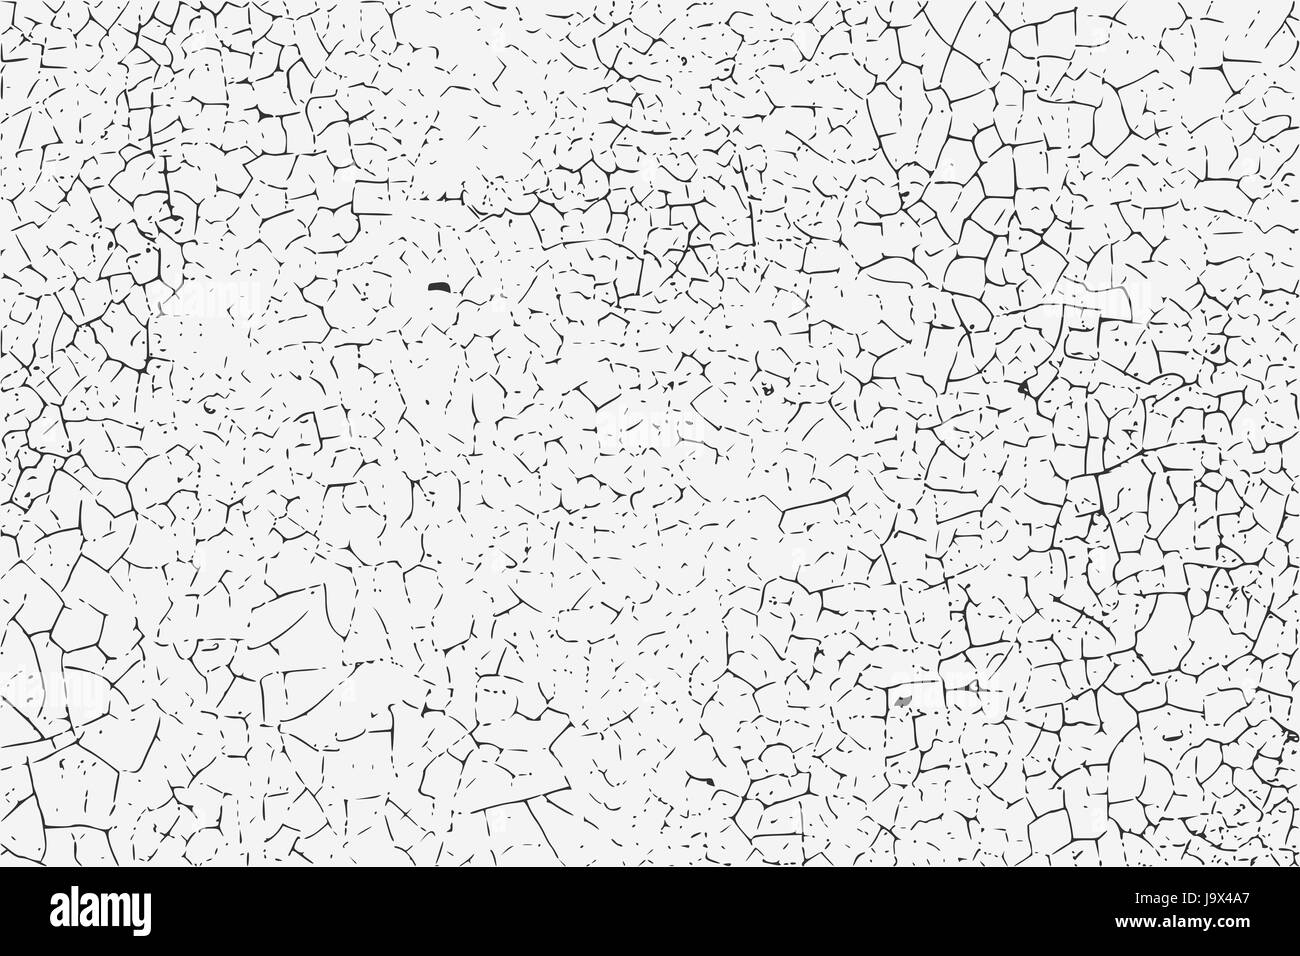 Grunge overlay texture. Vector illustration of black and white abstract grunge old weathered cracked background for your design Stock Vector